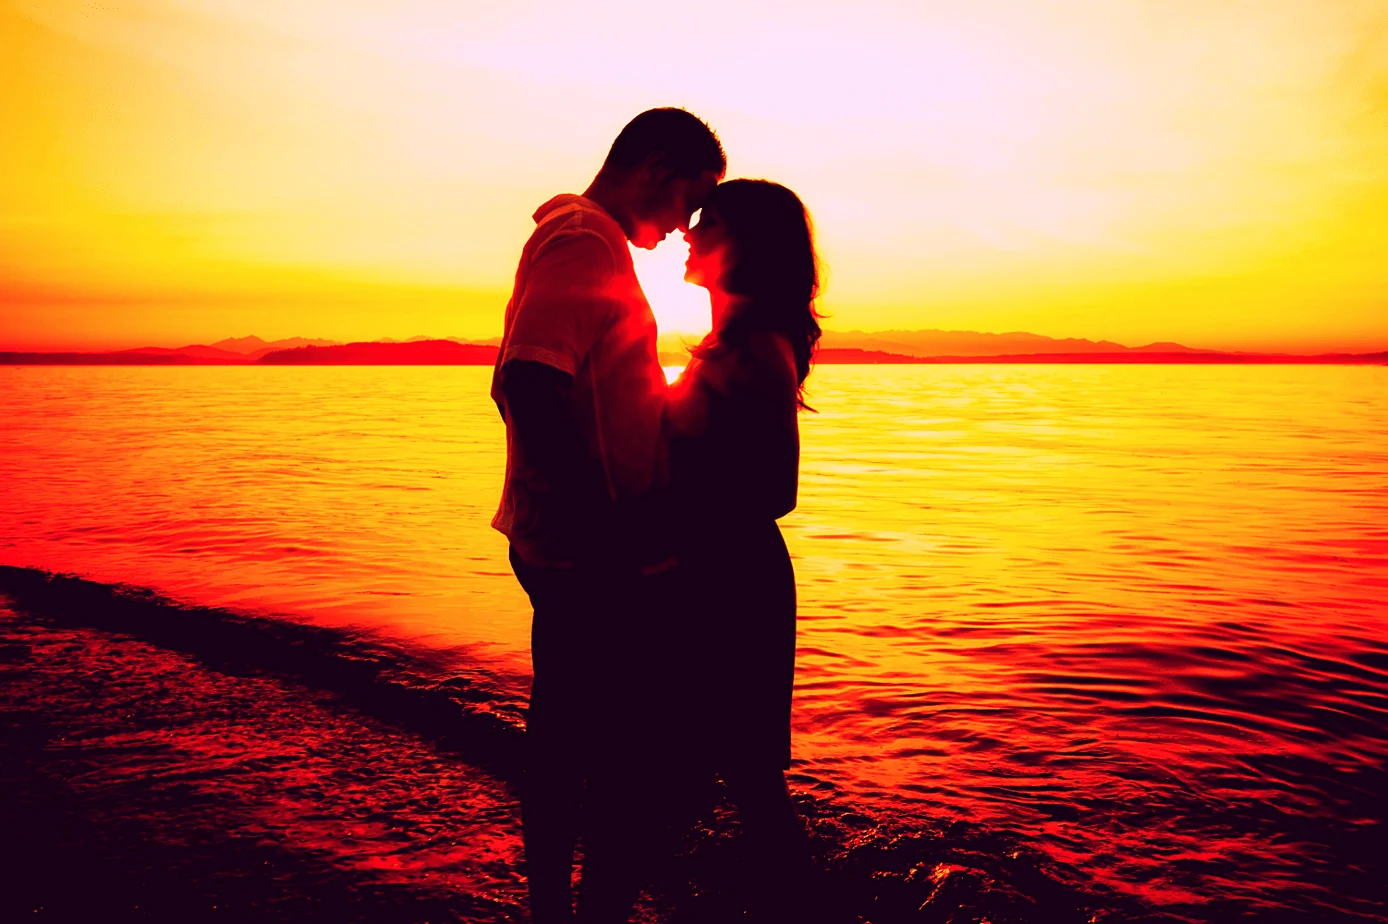 twin flame love on the beach in passionate sun silhouette